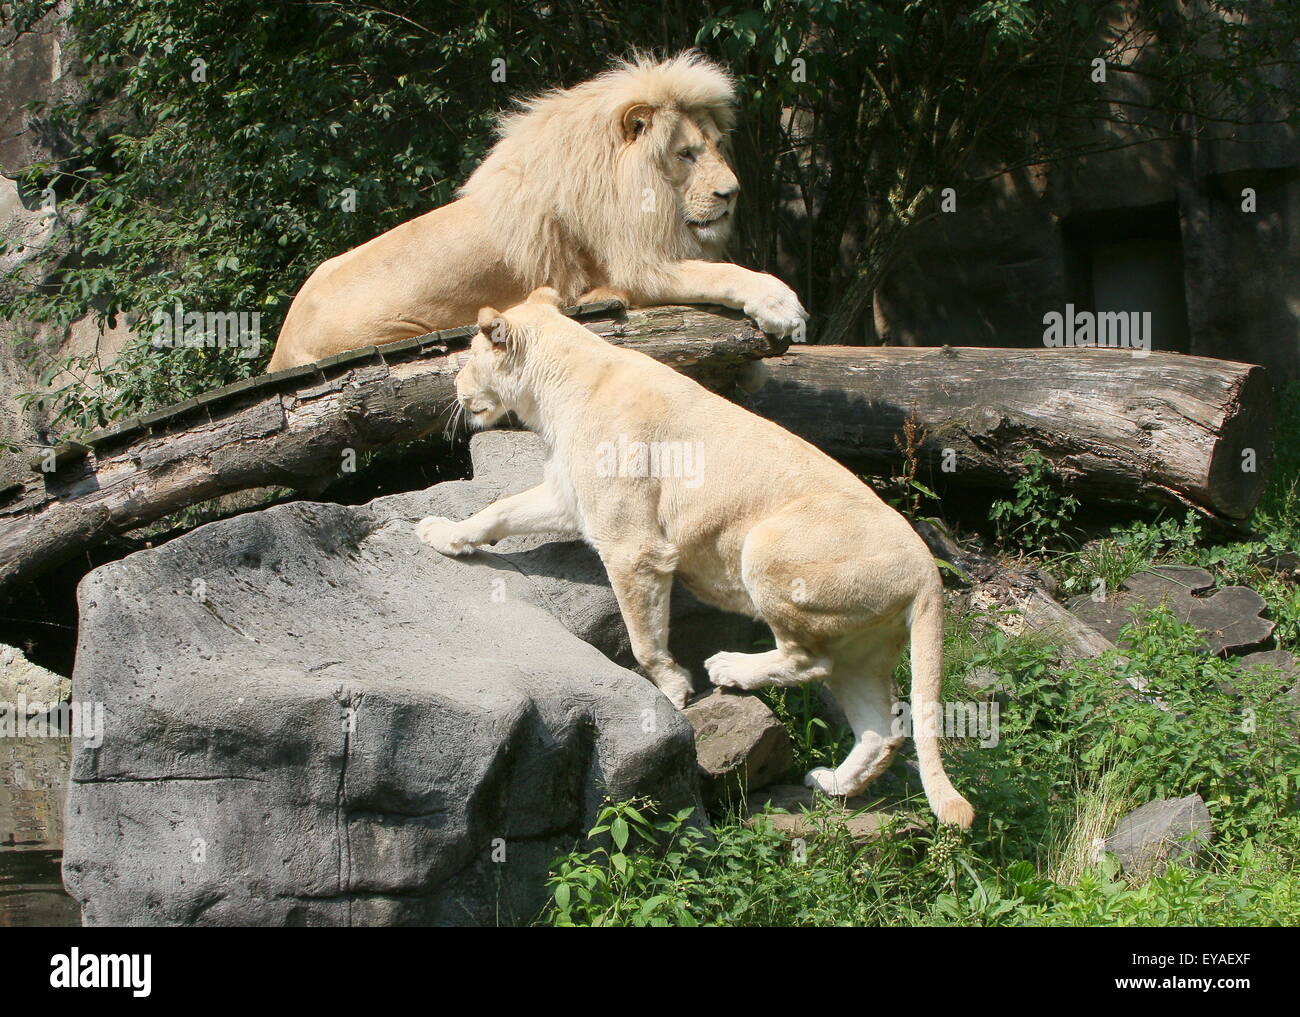 Mature male lion (Panthera leo Krugeri) together with a young female at Ouwehand Rhenen Zoo, The Netherlands Stock Photo